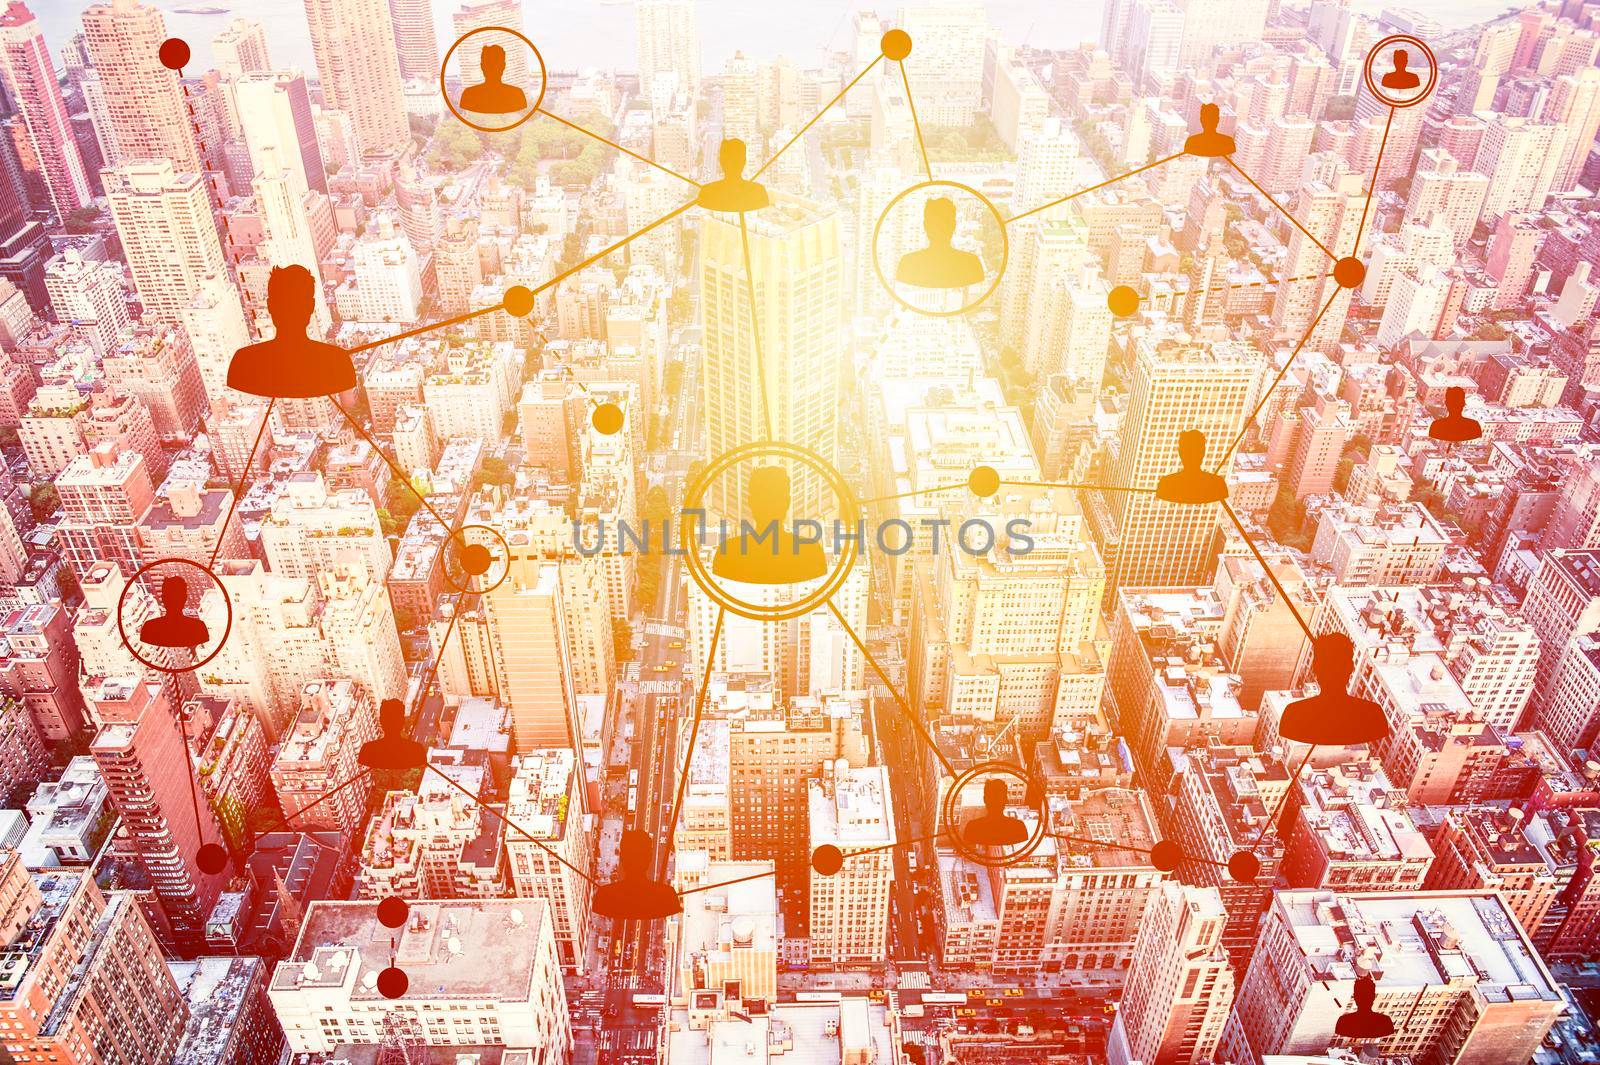 Social networking technologies above a city by cla78